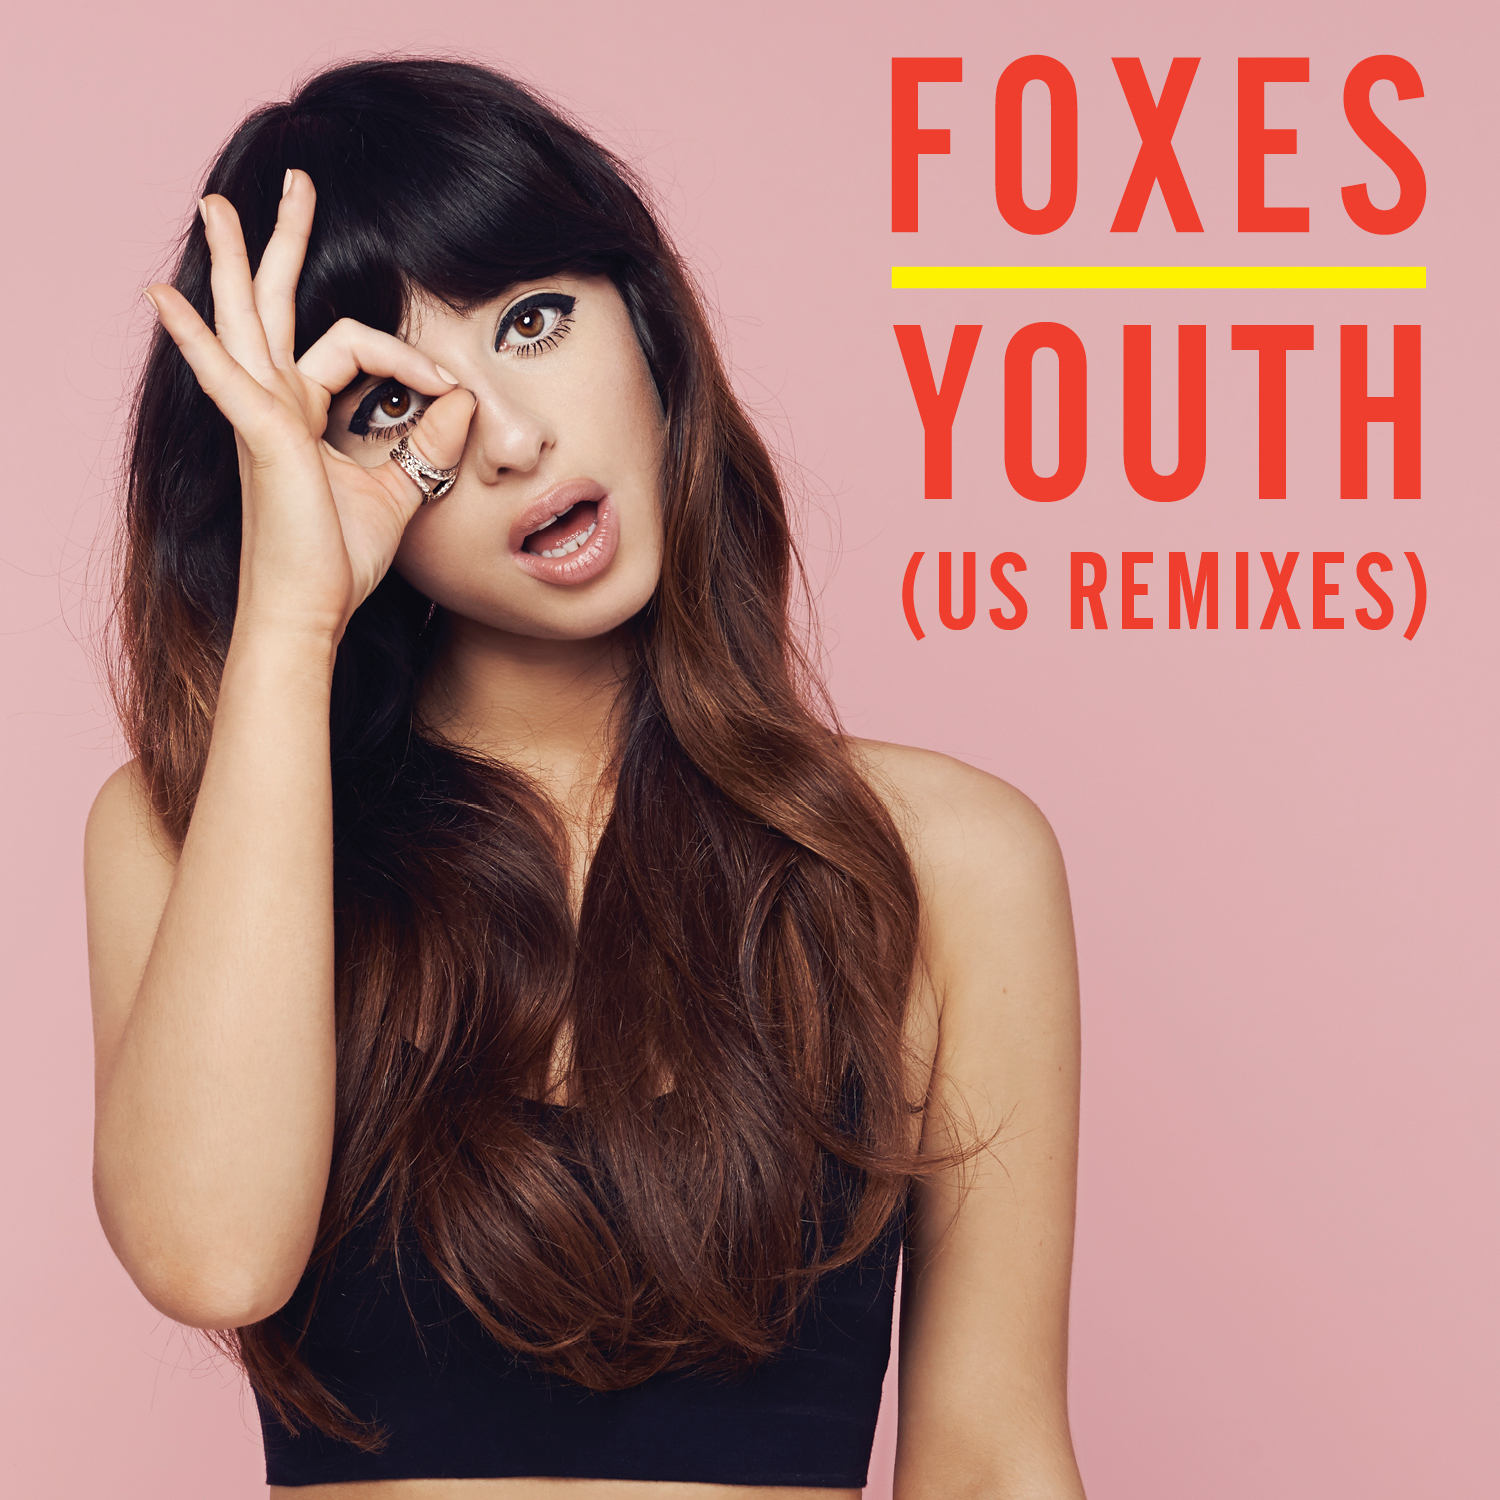 Foxes-Youth-Us-Remixes